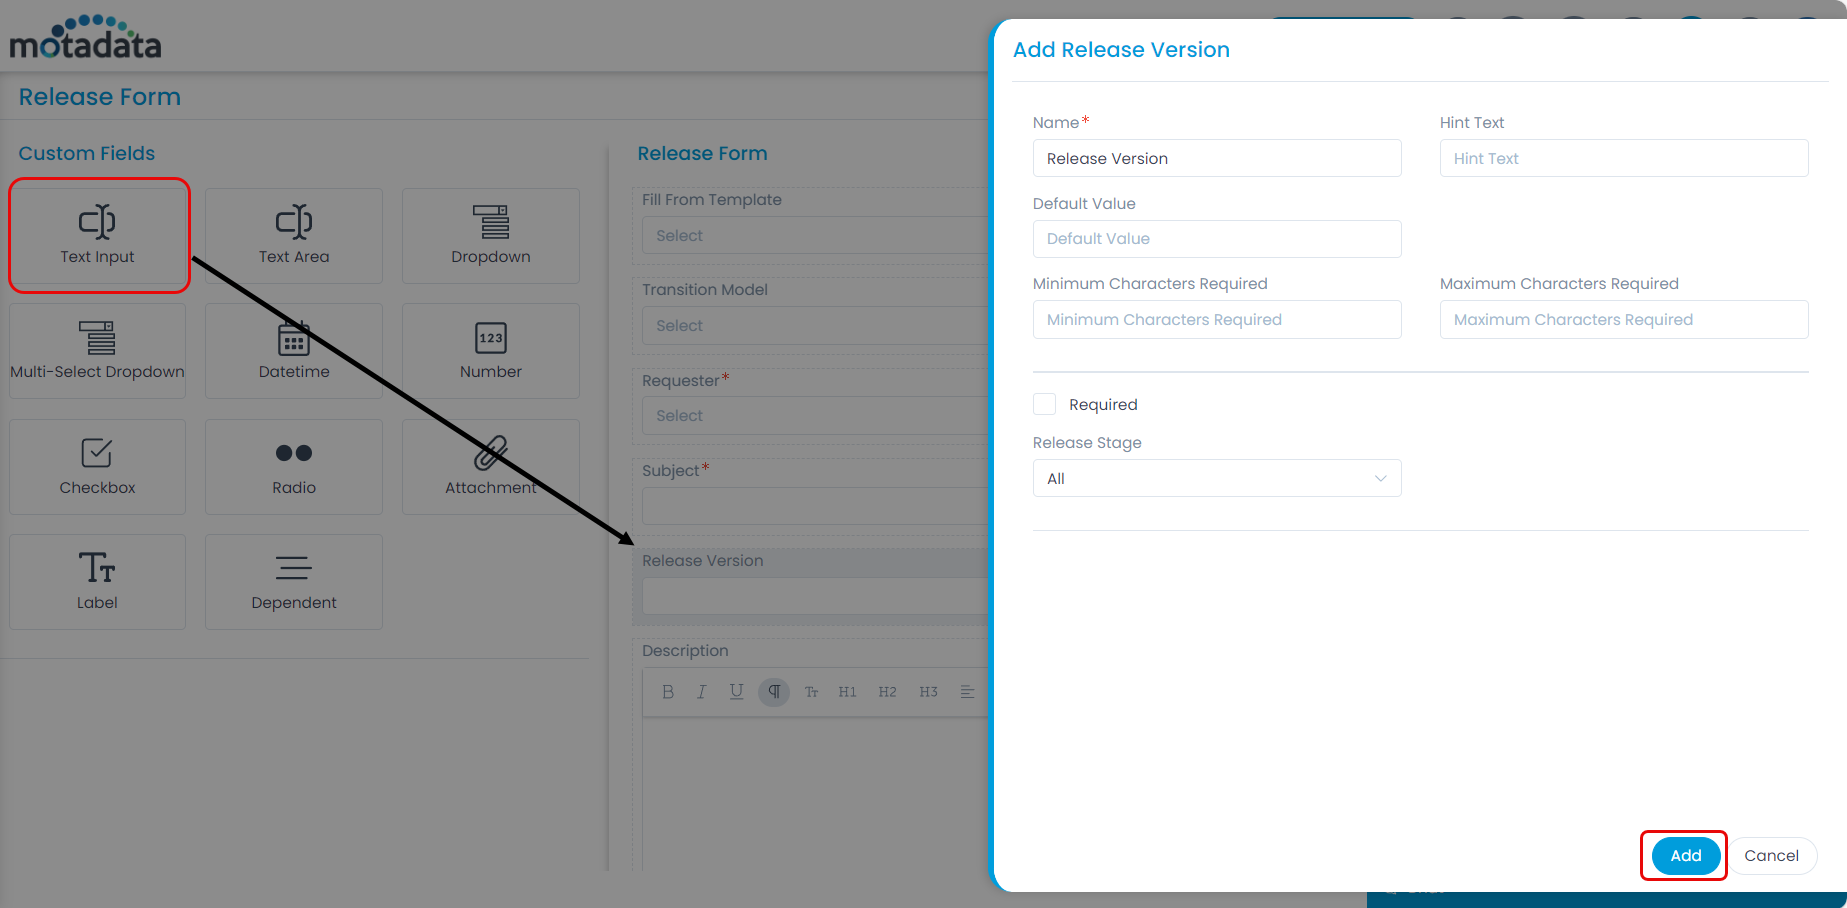 Adding Custom Field in the Release Form